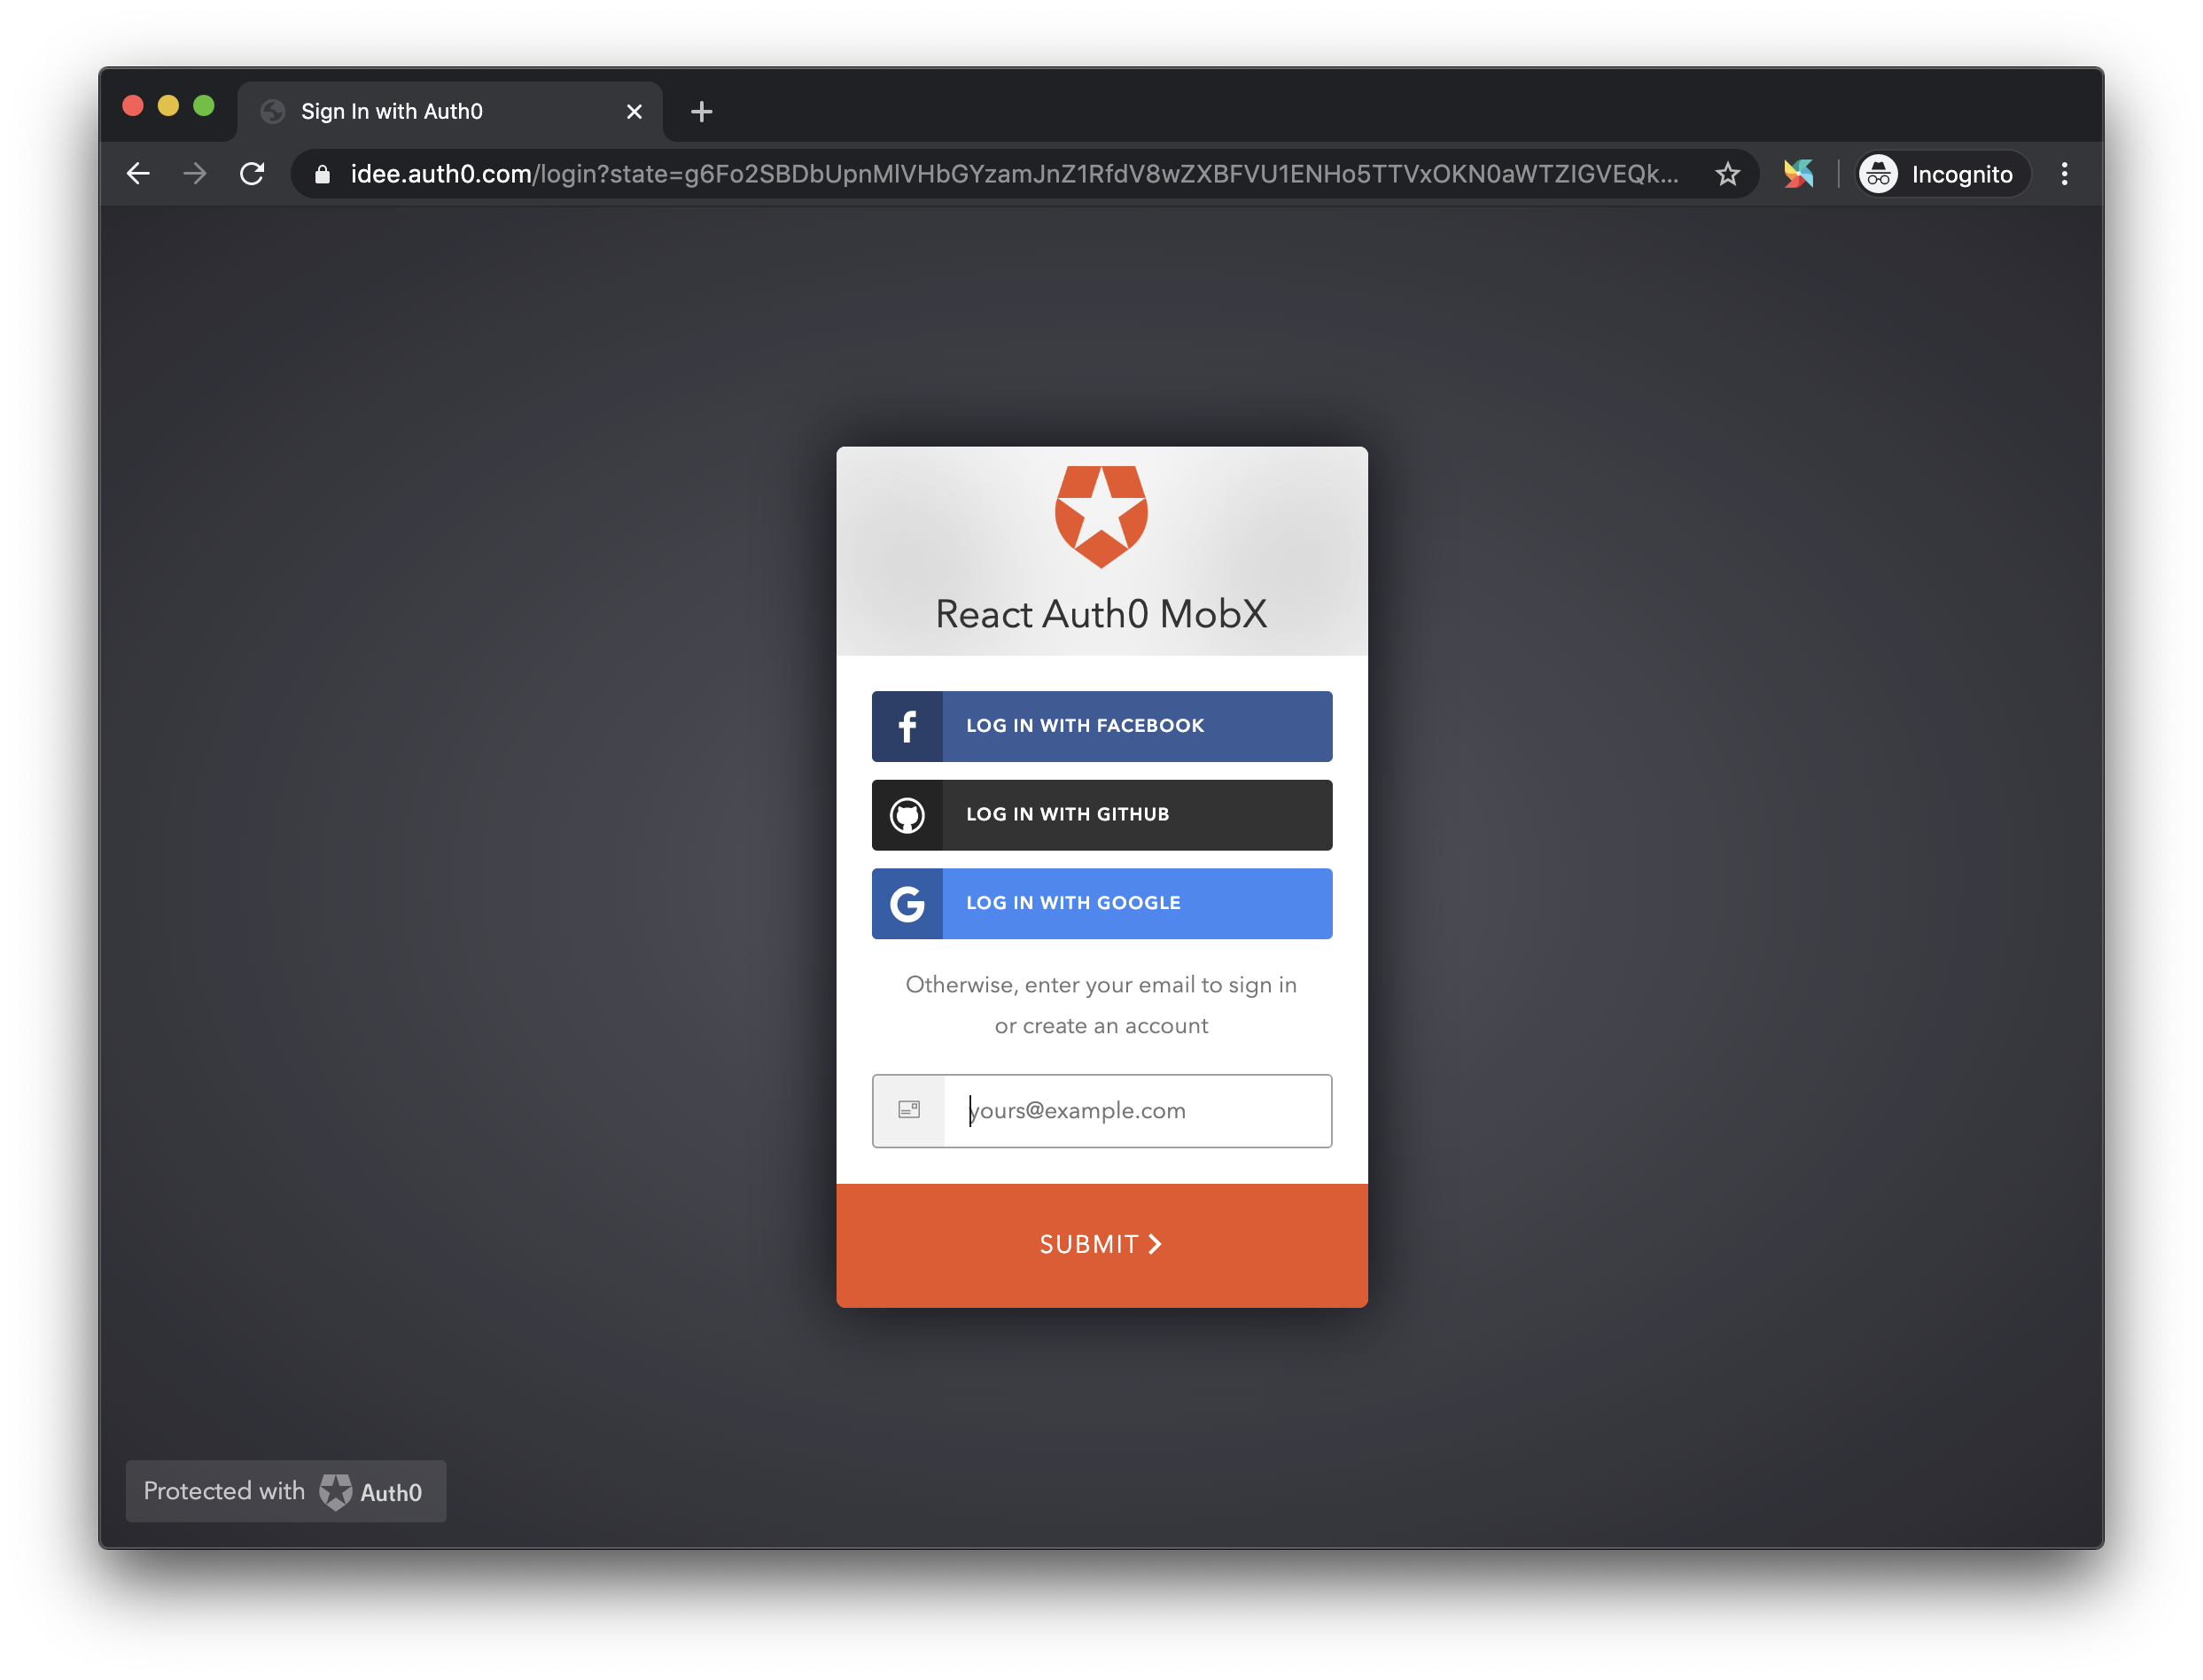 Auth0 Modal View